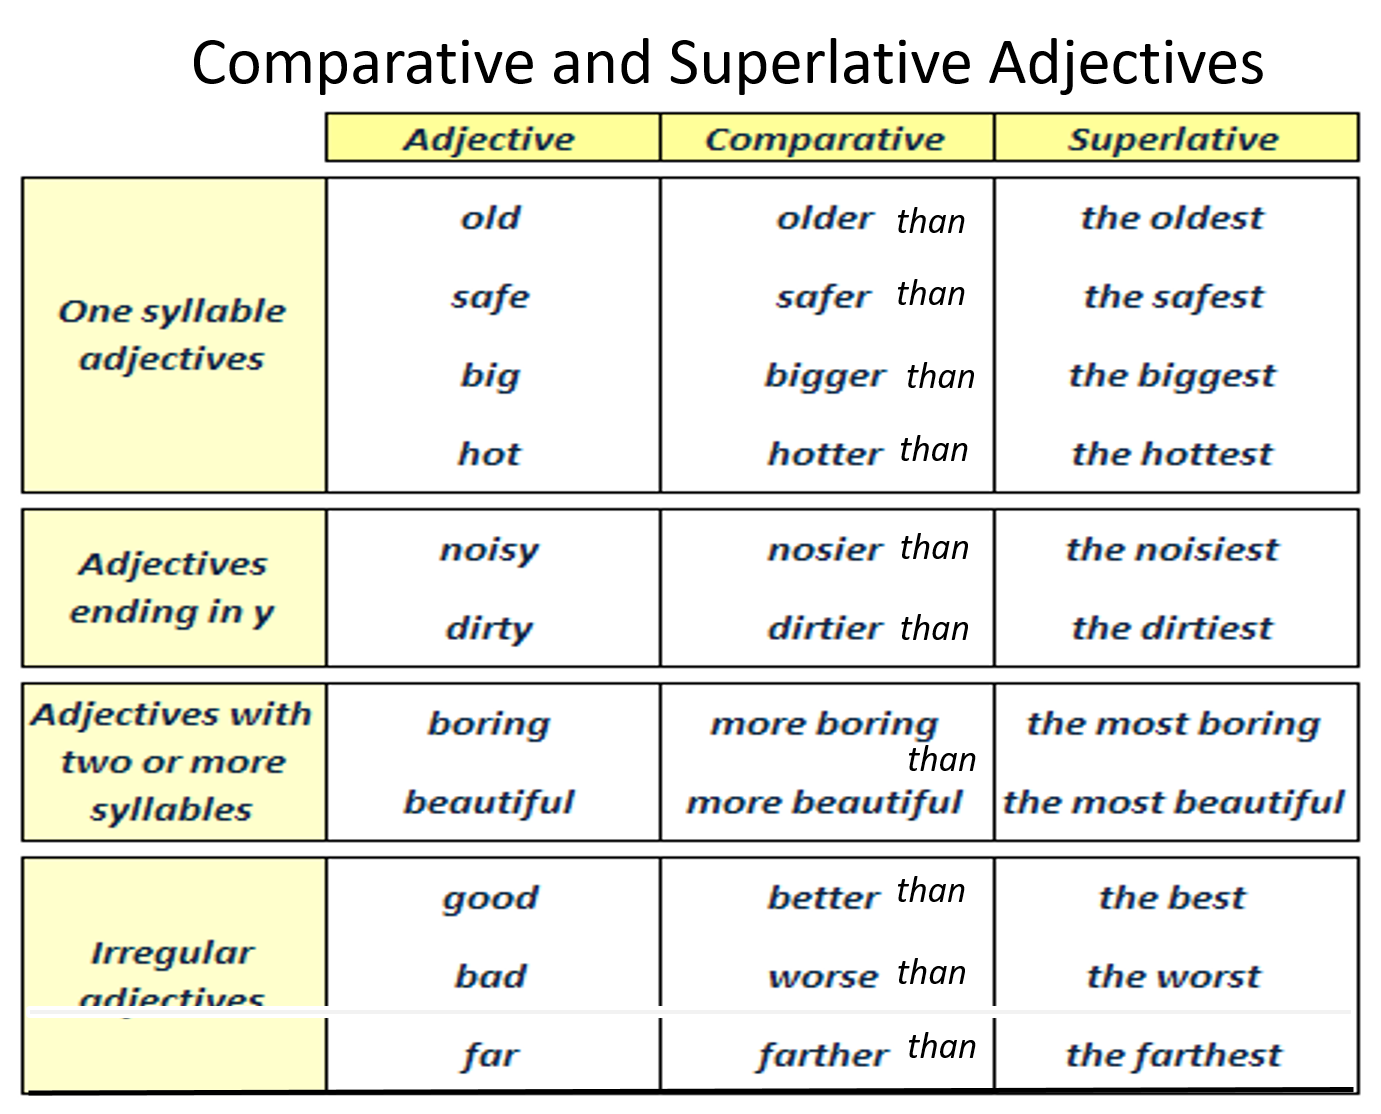 Comparatives and Superlatives правило таблица. Comparative adjectives таблица. Таблица Comparative and Superlative. Comparatives and Superlatives правило.